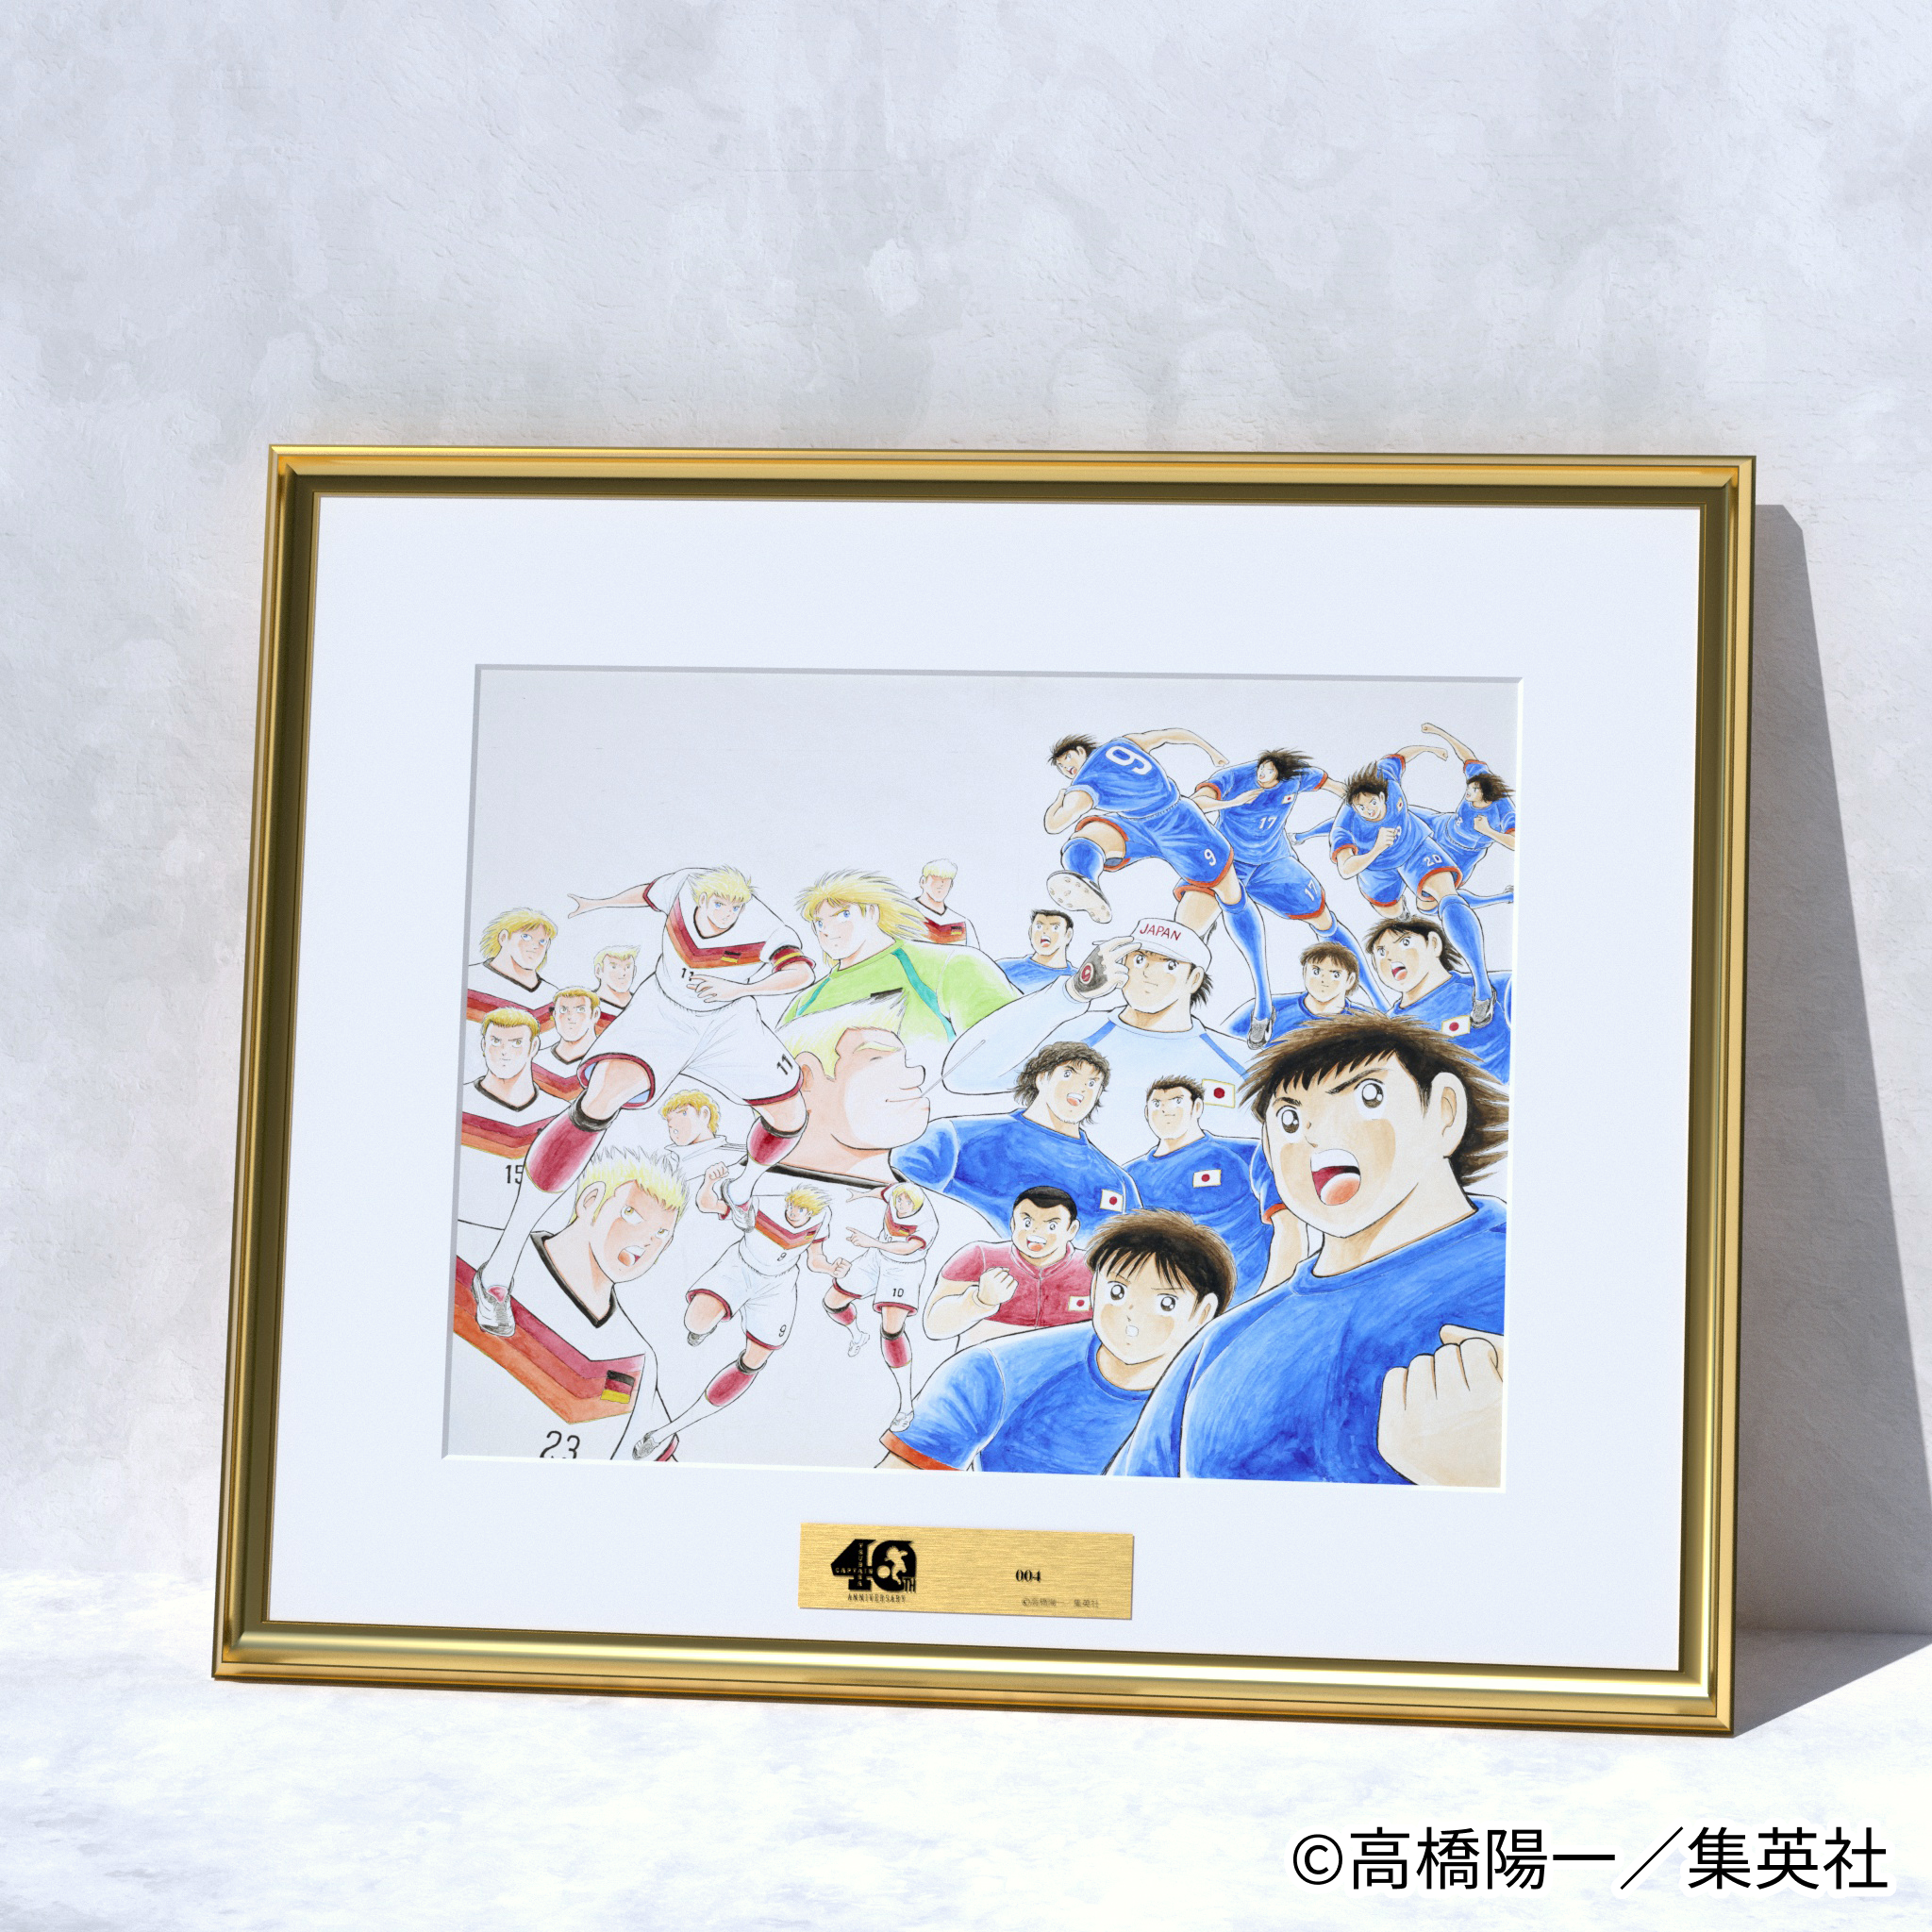 (JAPAN LIMITED) CAPTAIN TSUBASA COLLECTION MEMORIAL CADRE 40TH ANNIVERSARY LIMITED EDITION 004